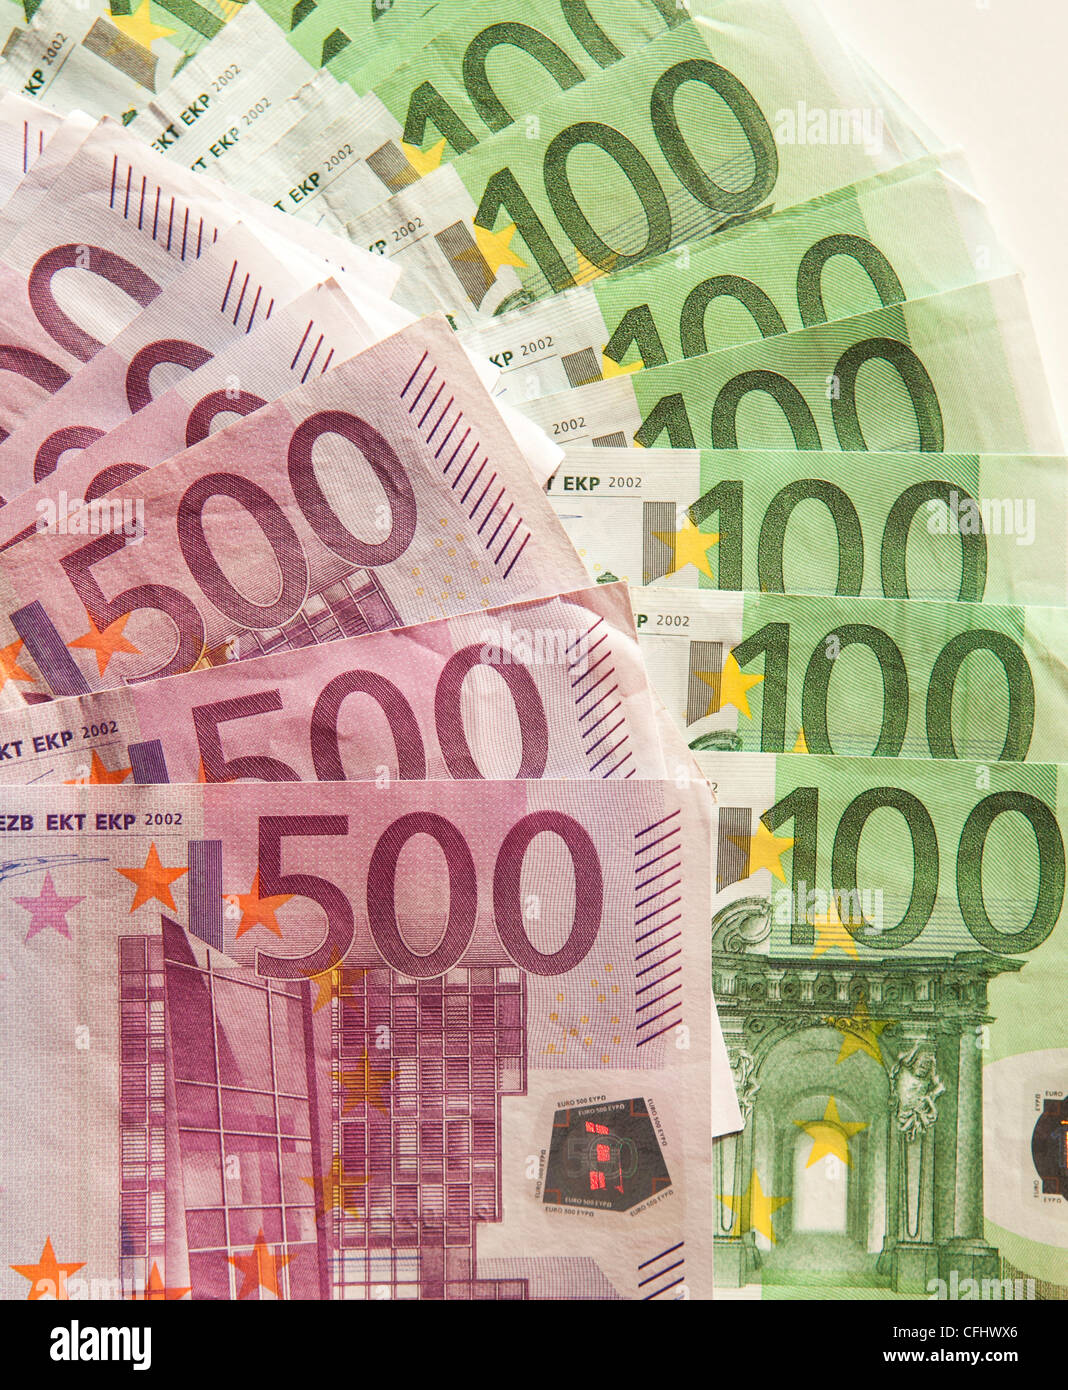 euro banknotes used in Europe Stock Photo